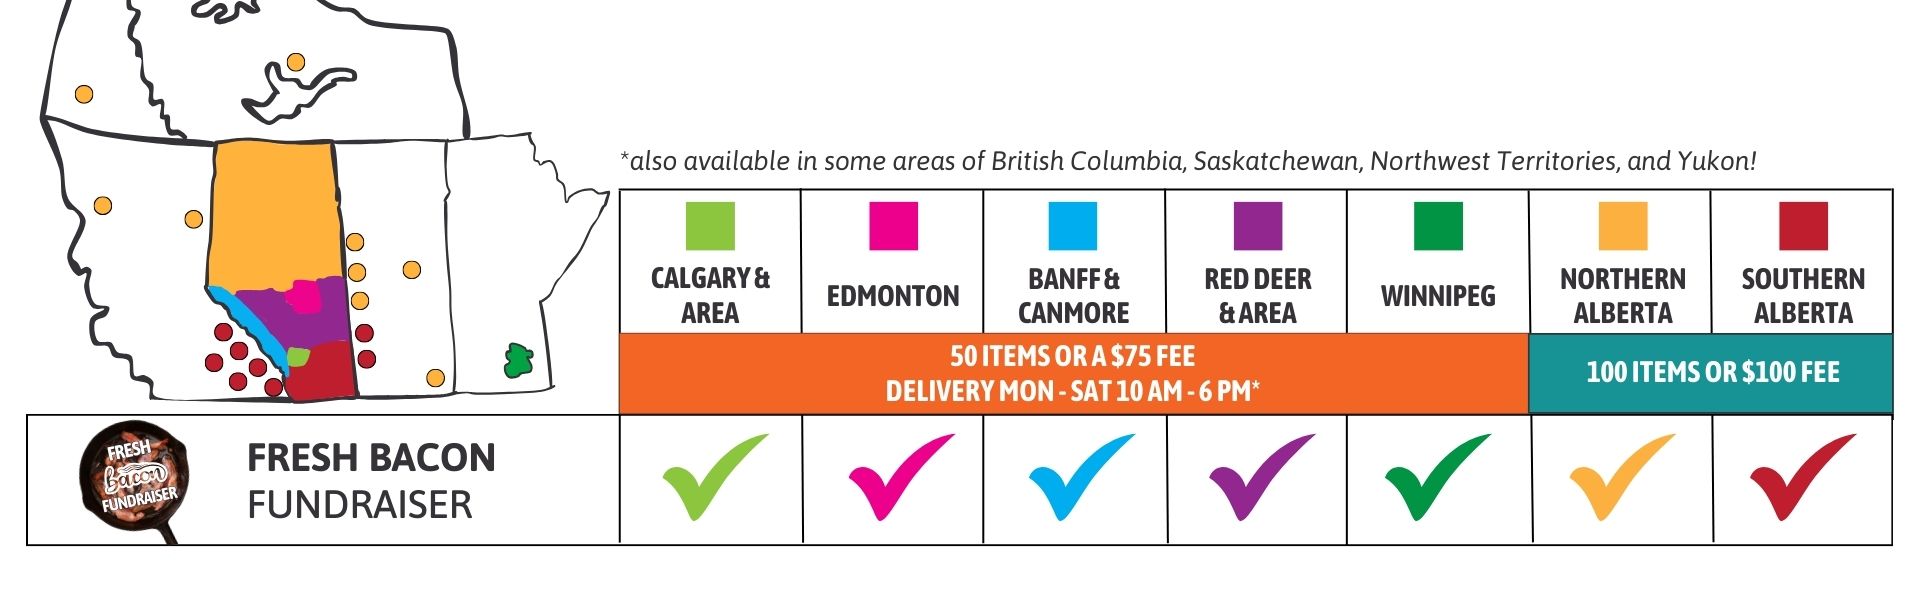 Canadian Fresh Bacon Fundraiser Delivery Locations TeamFund Fundraising